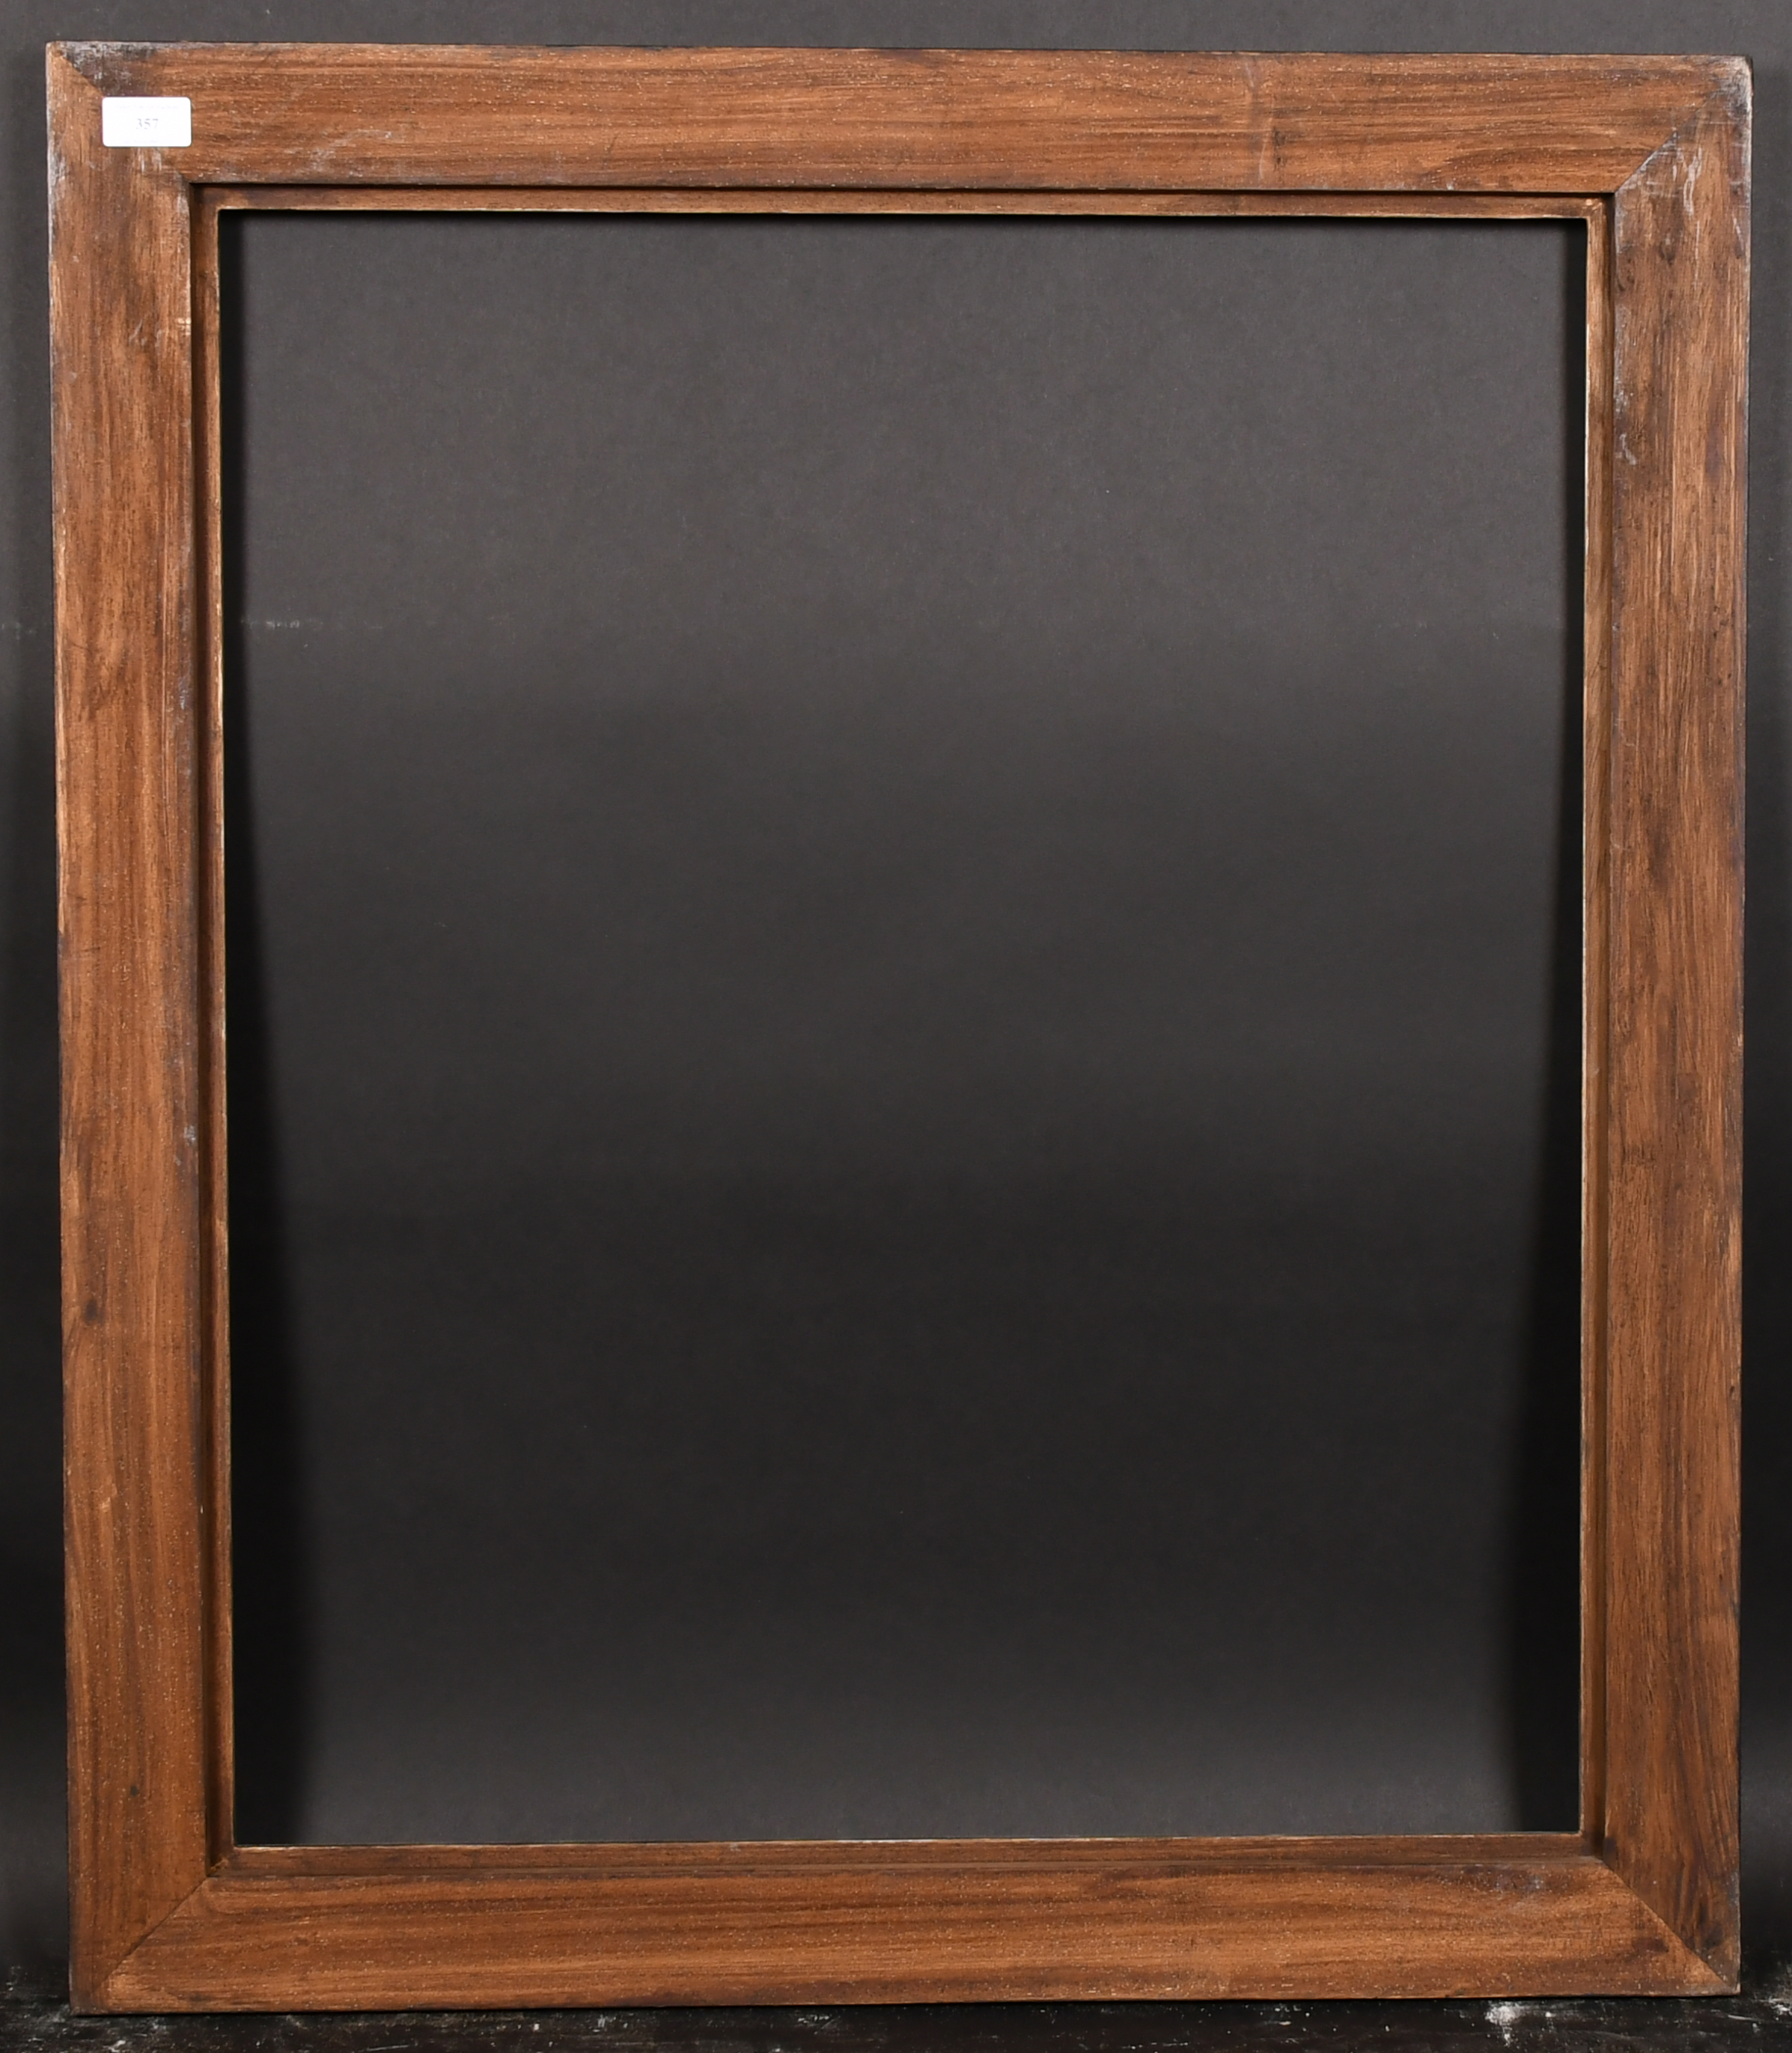 20th Century English School. A Black and Silver Composition Frame, rebate 29.75" x 24.75" (75.6 x - Image 3 of 3